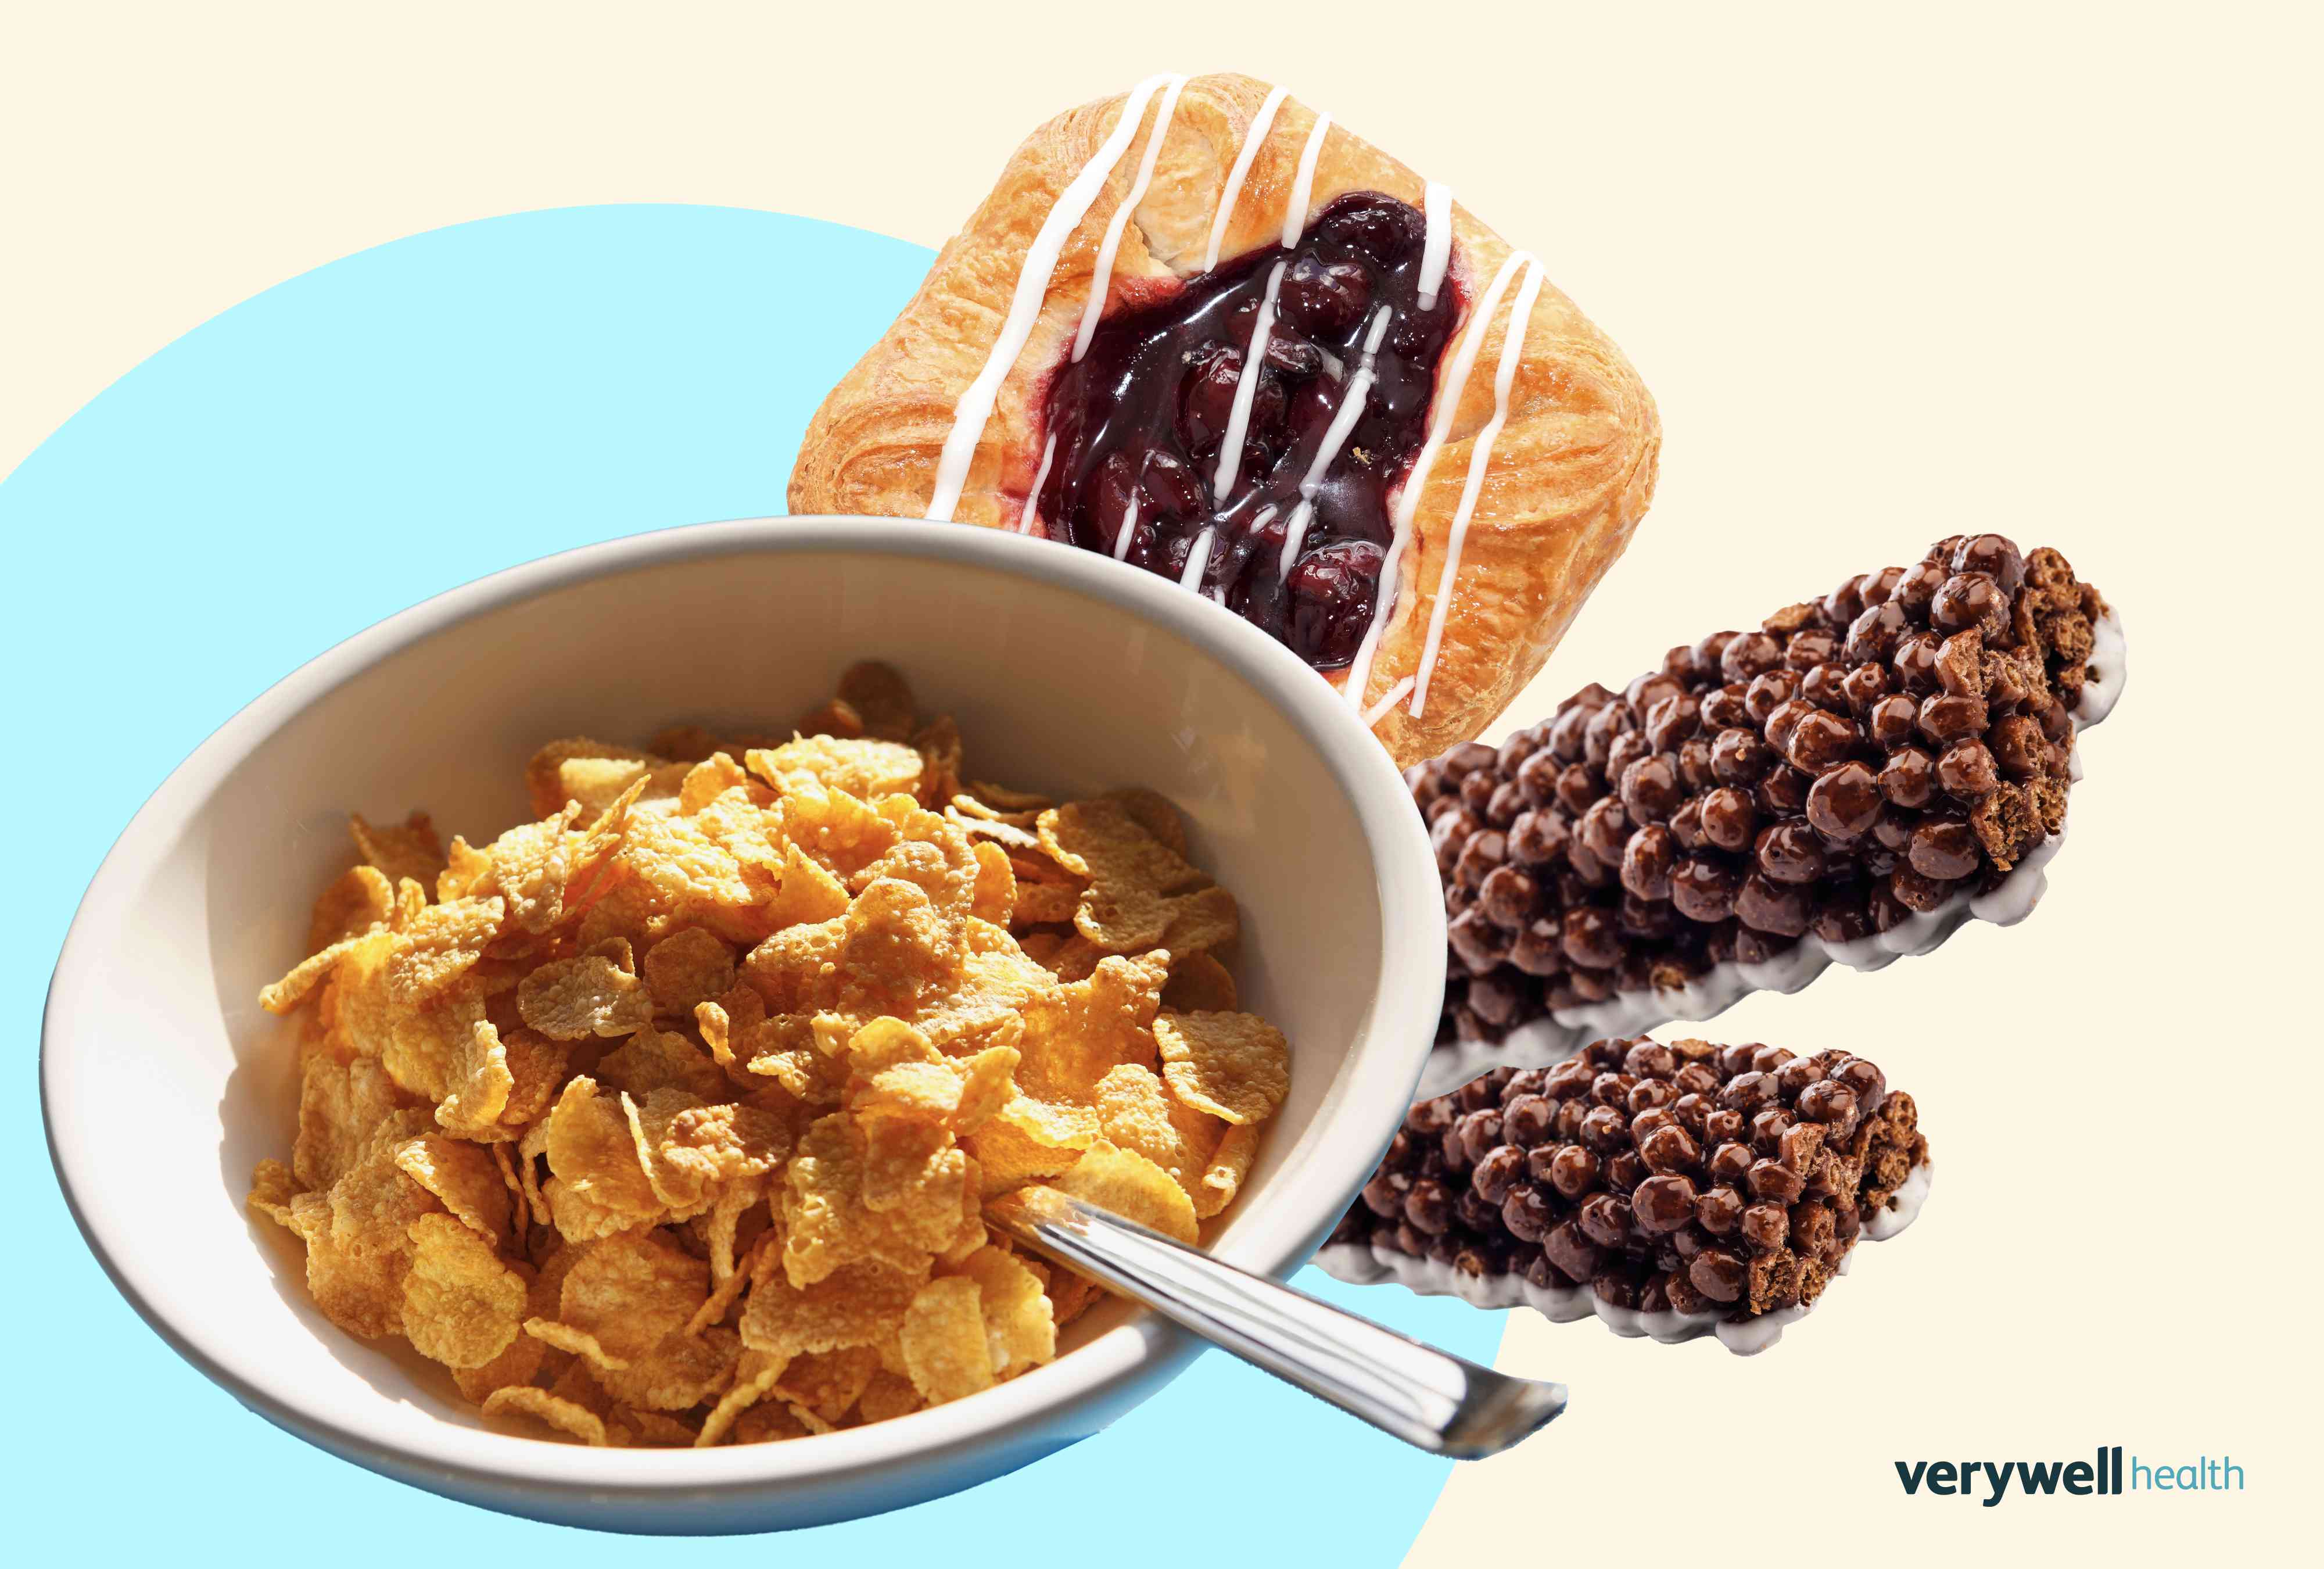 These 7 Breakfast Staples Are Ultra-Processed. How Should You Decide Which Ones to Avoid?